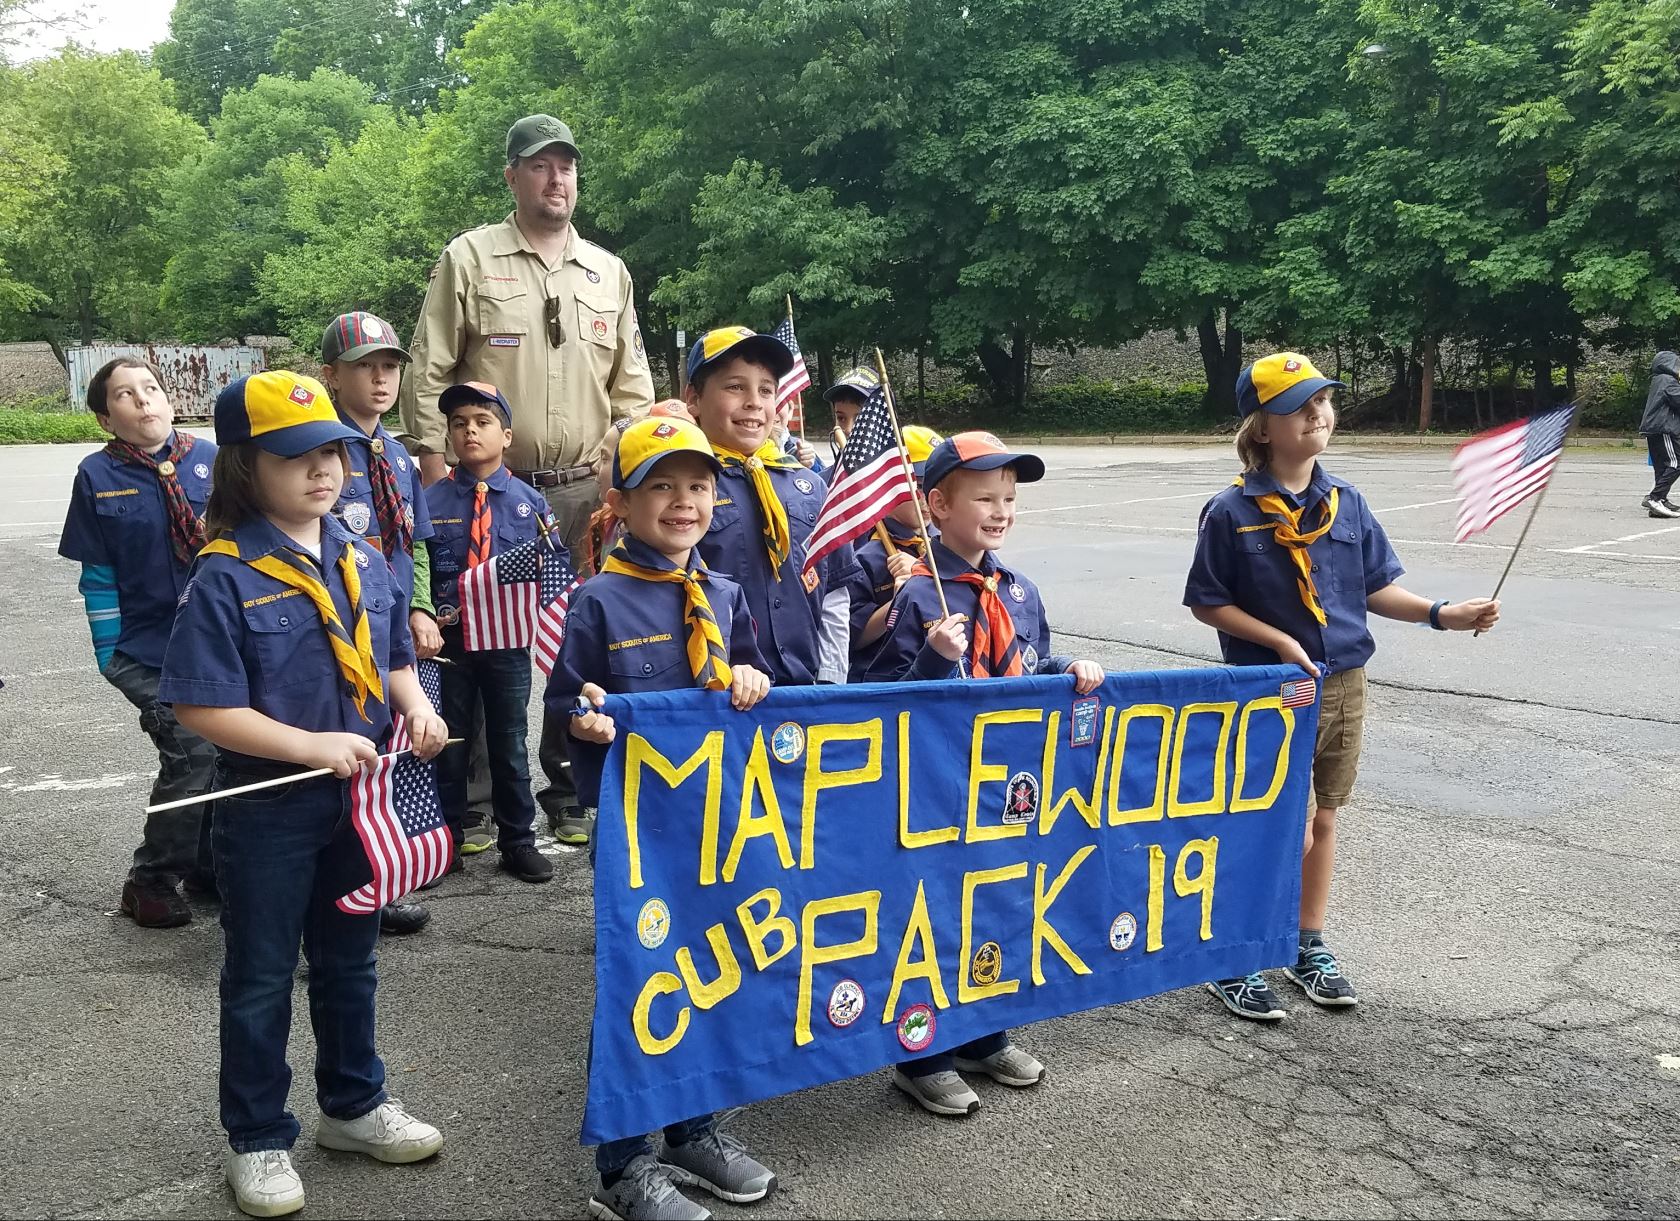 Maplewood Pack 19 Cub Scouts to Provide Safe Outdoor Activities - The Village Green